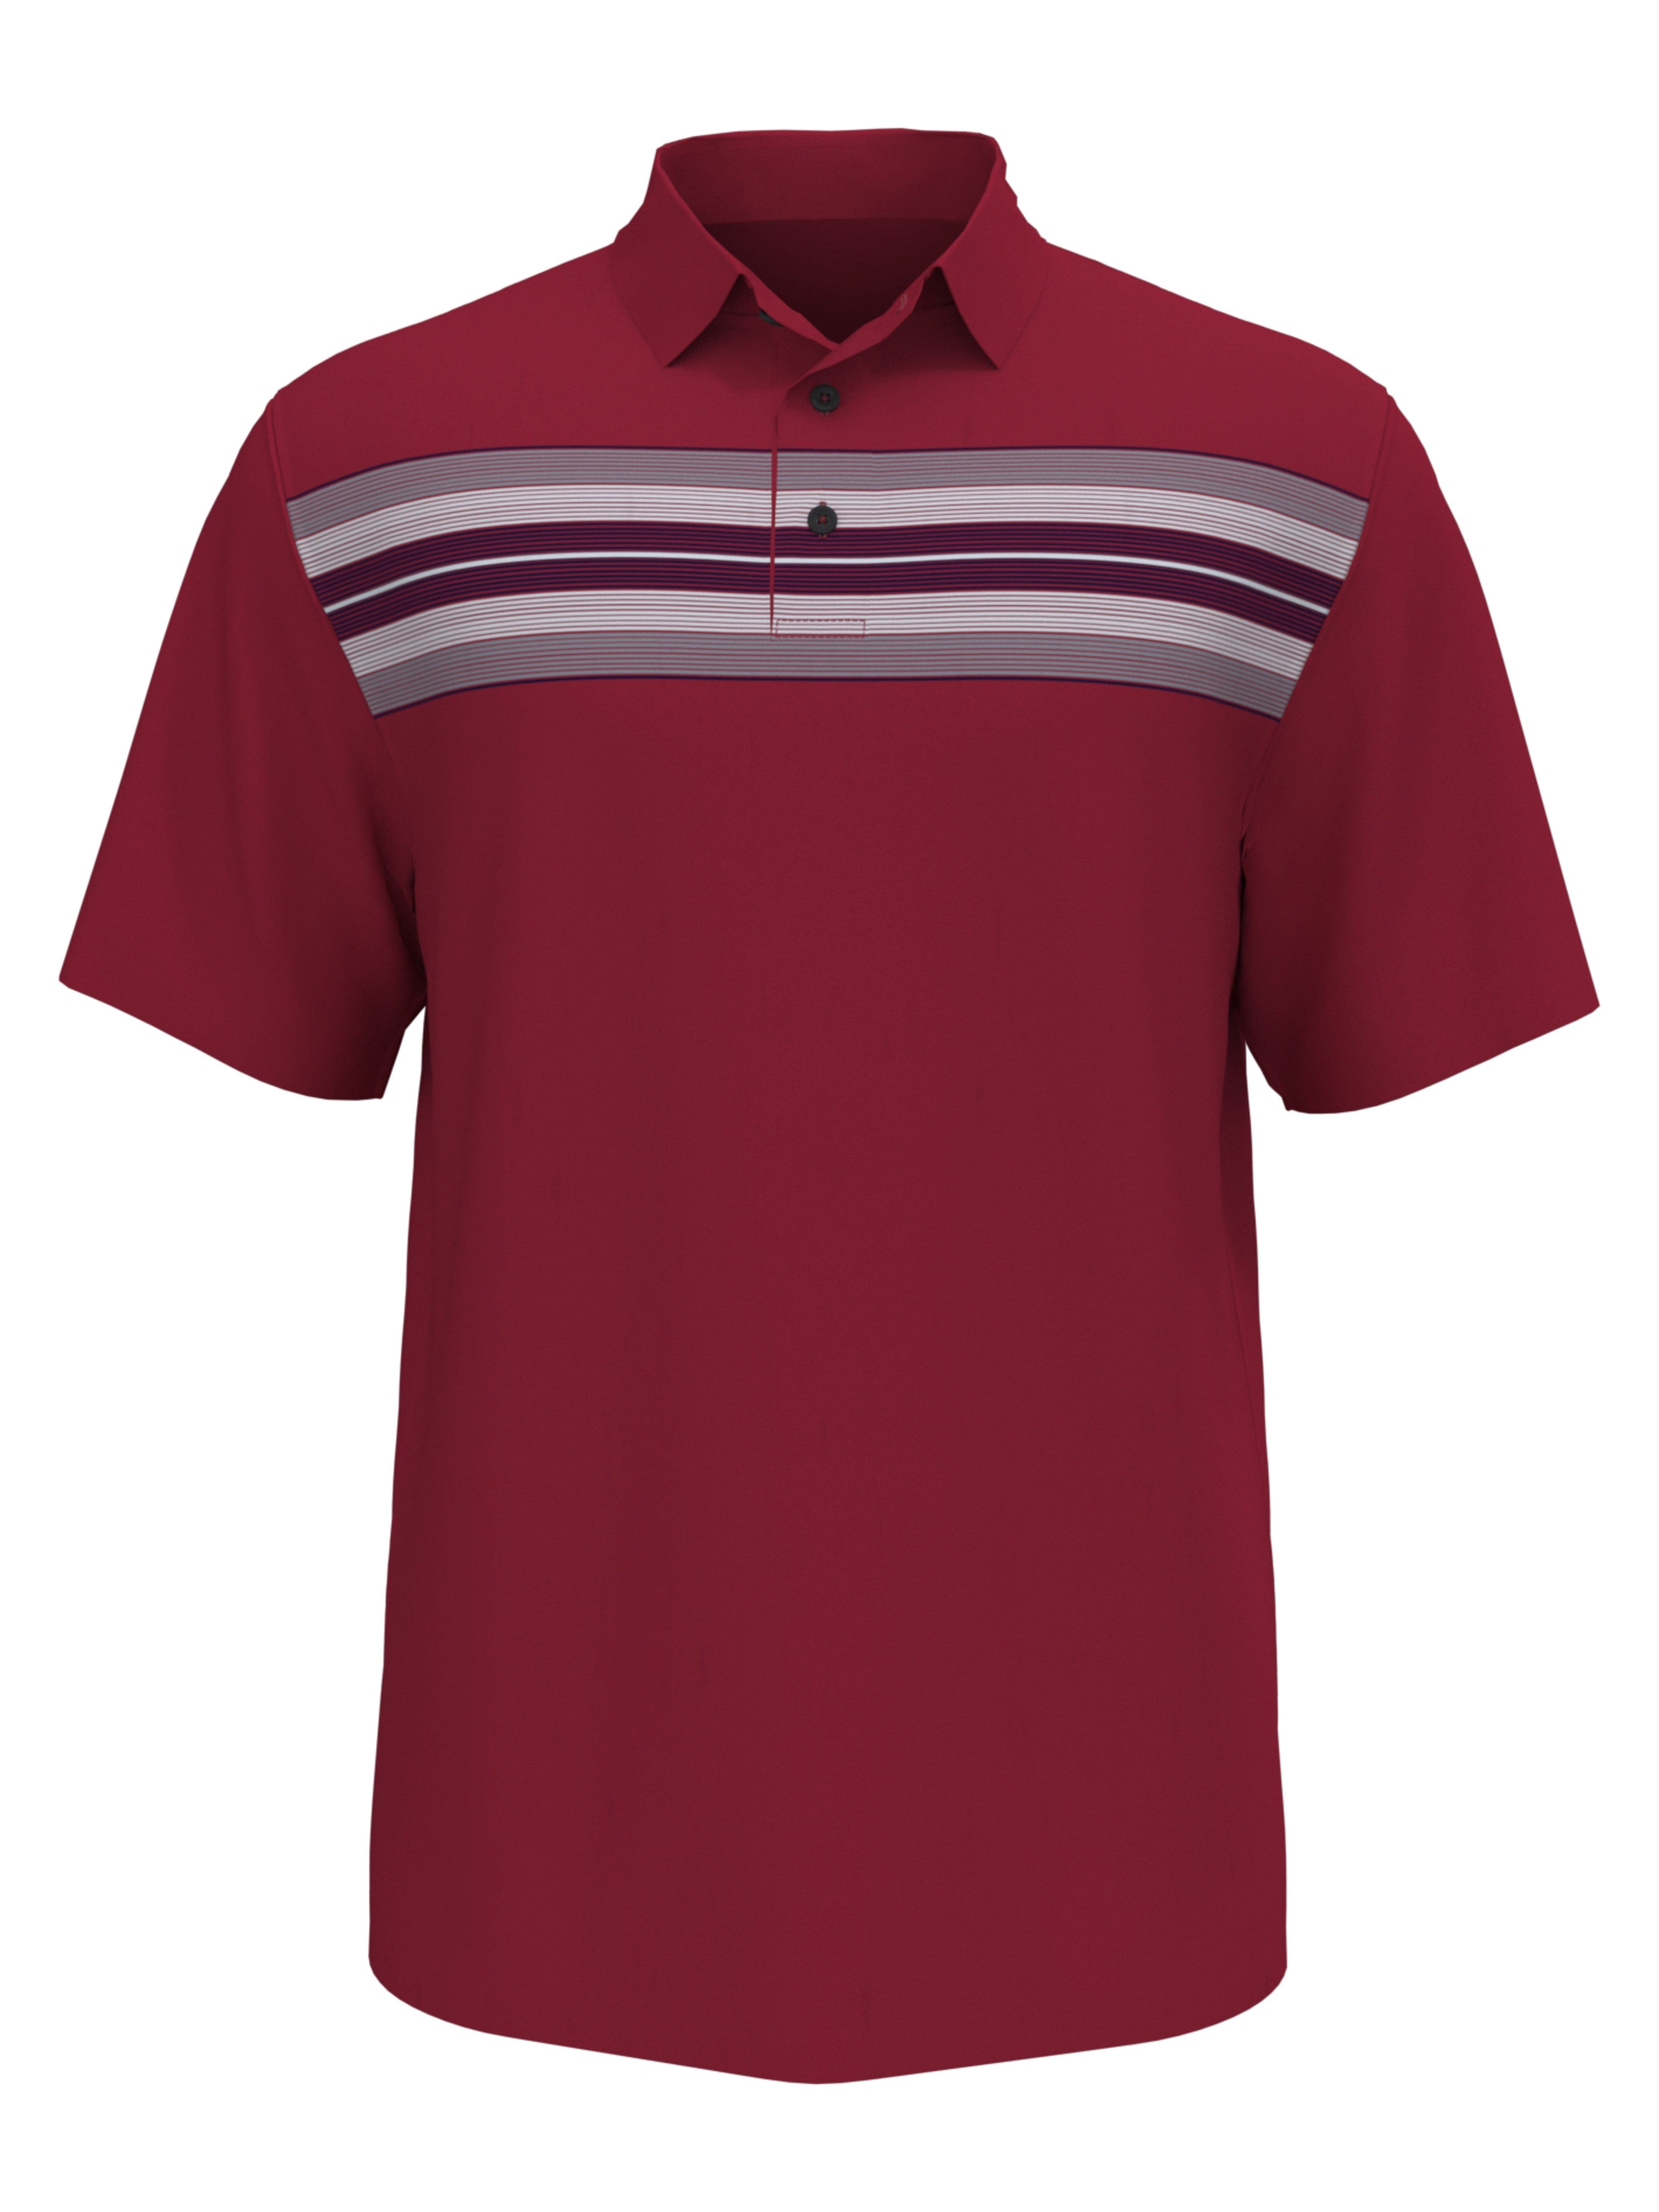 Jack Nicklaus Mens Chest Energy Stripe Polo Shirt, Size Large, Red Bud, 100% Polyester | Golf Apparel Shop